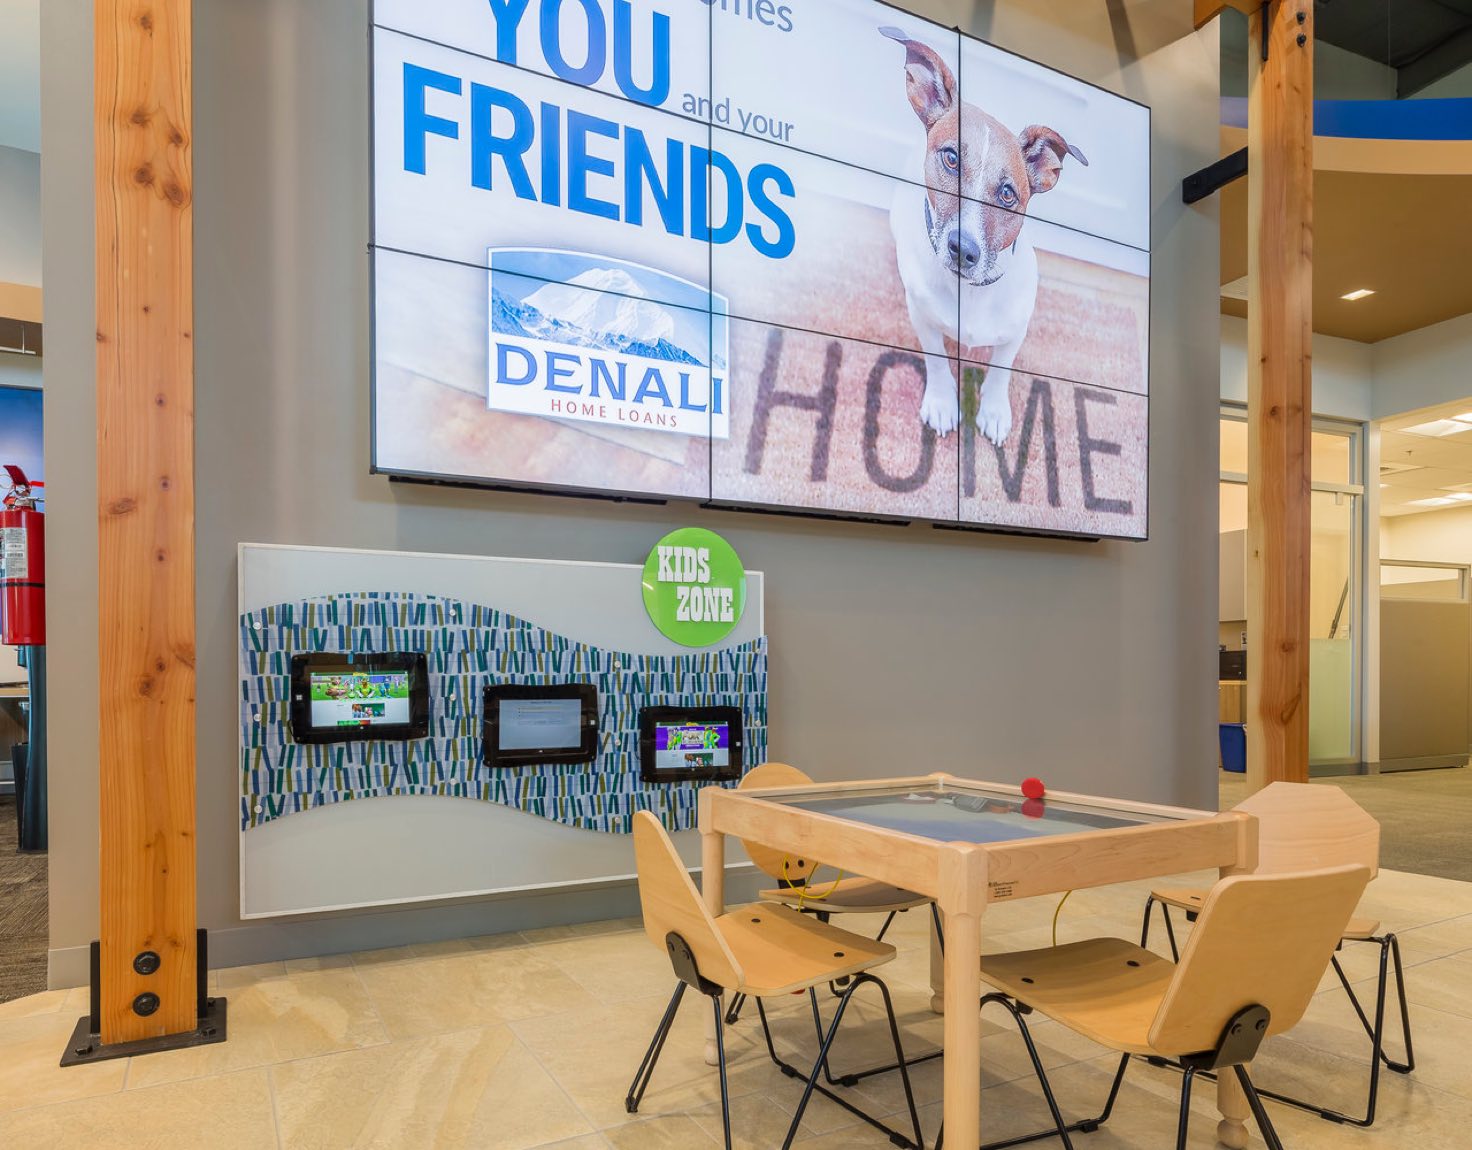 A children's waiting room with touchscreens in a bank lobby.